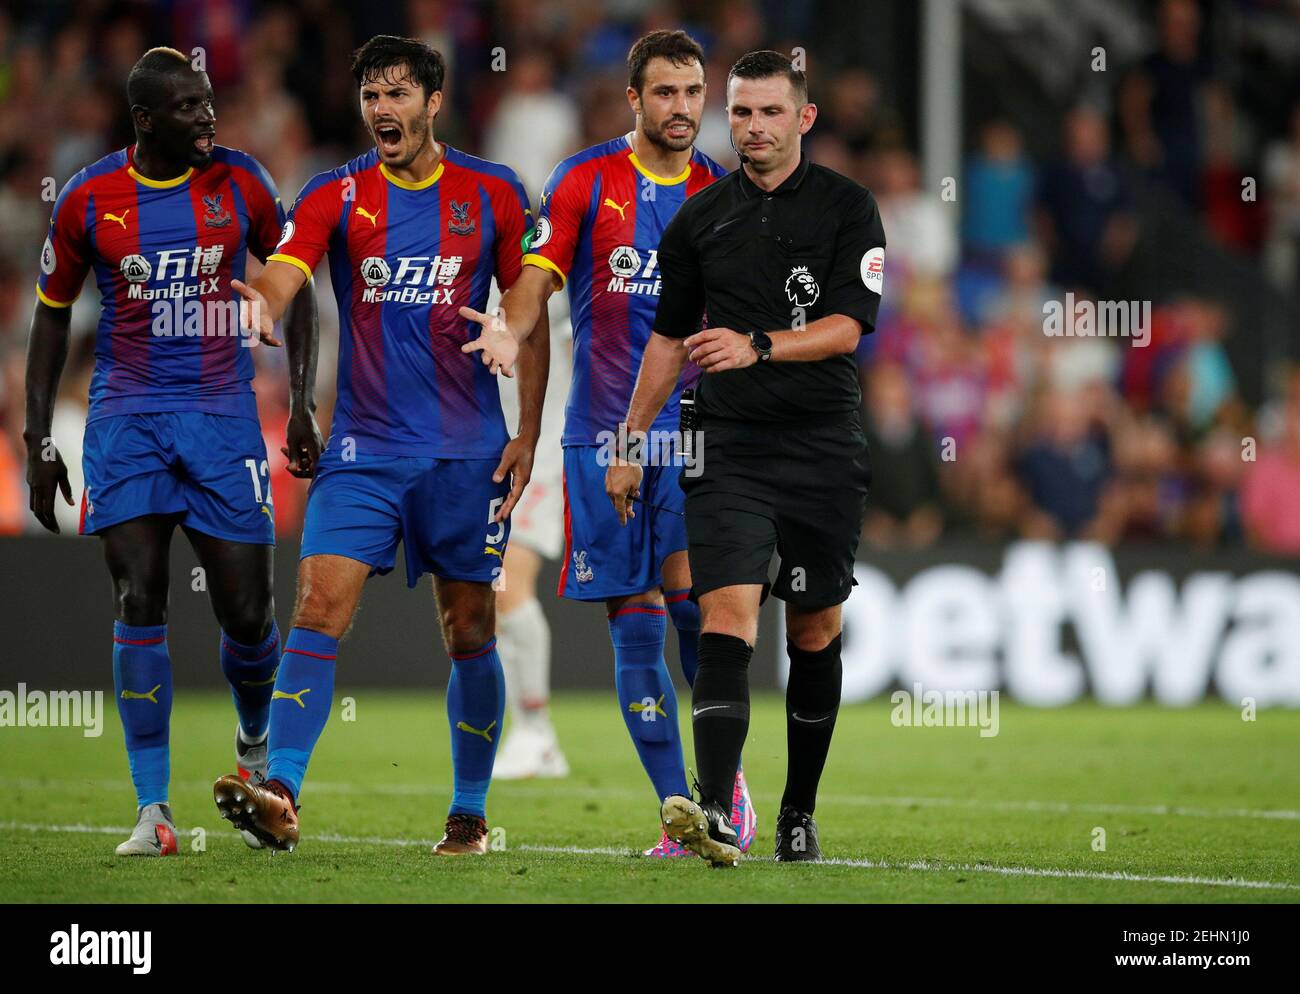 Soccer Football - Premier League - Crystal Palace v Liverpool - Selhurst Park, London, Britain - August 20, 2018  Crystal Palace players with referee Michael Oliver                    Action Images via Reuters/John Sibley  EDITORIAL USE ONLY. No use with unauthorized audio, video, data, fixture lists, club/league logos or 'live' services. Online in-match use limited to 75 images, no video emulation. No use in betting, games or single club/league/player publications.  Please contact your account representative for further details. Stock Photo